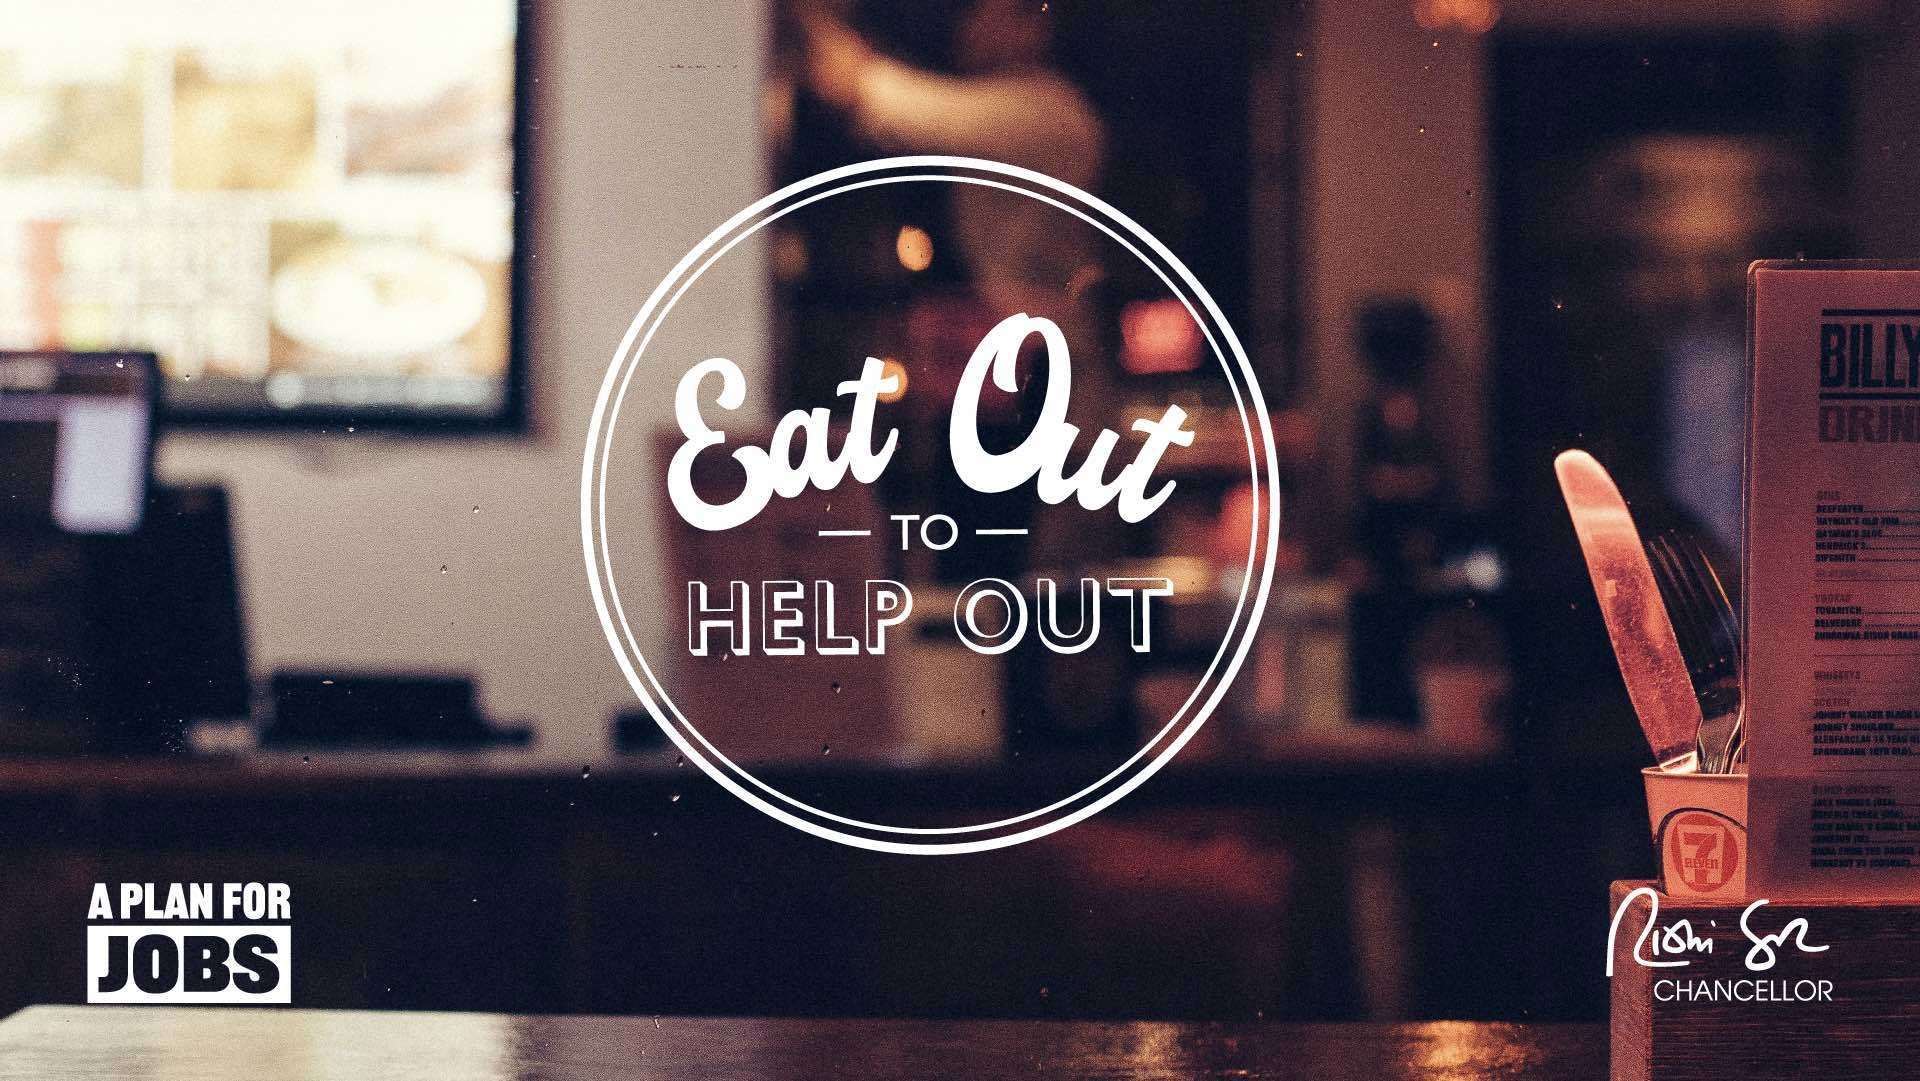 The Eat Out to Help Out scheme